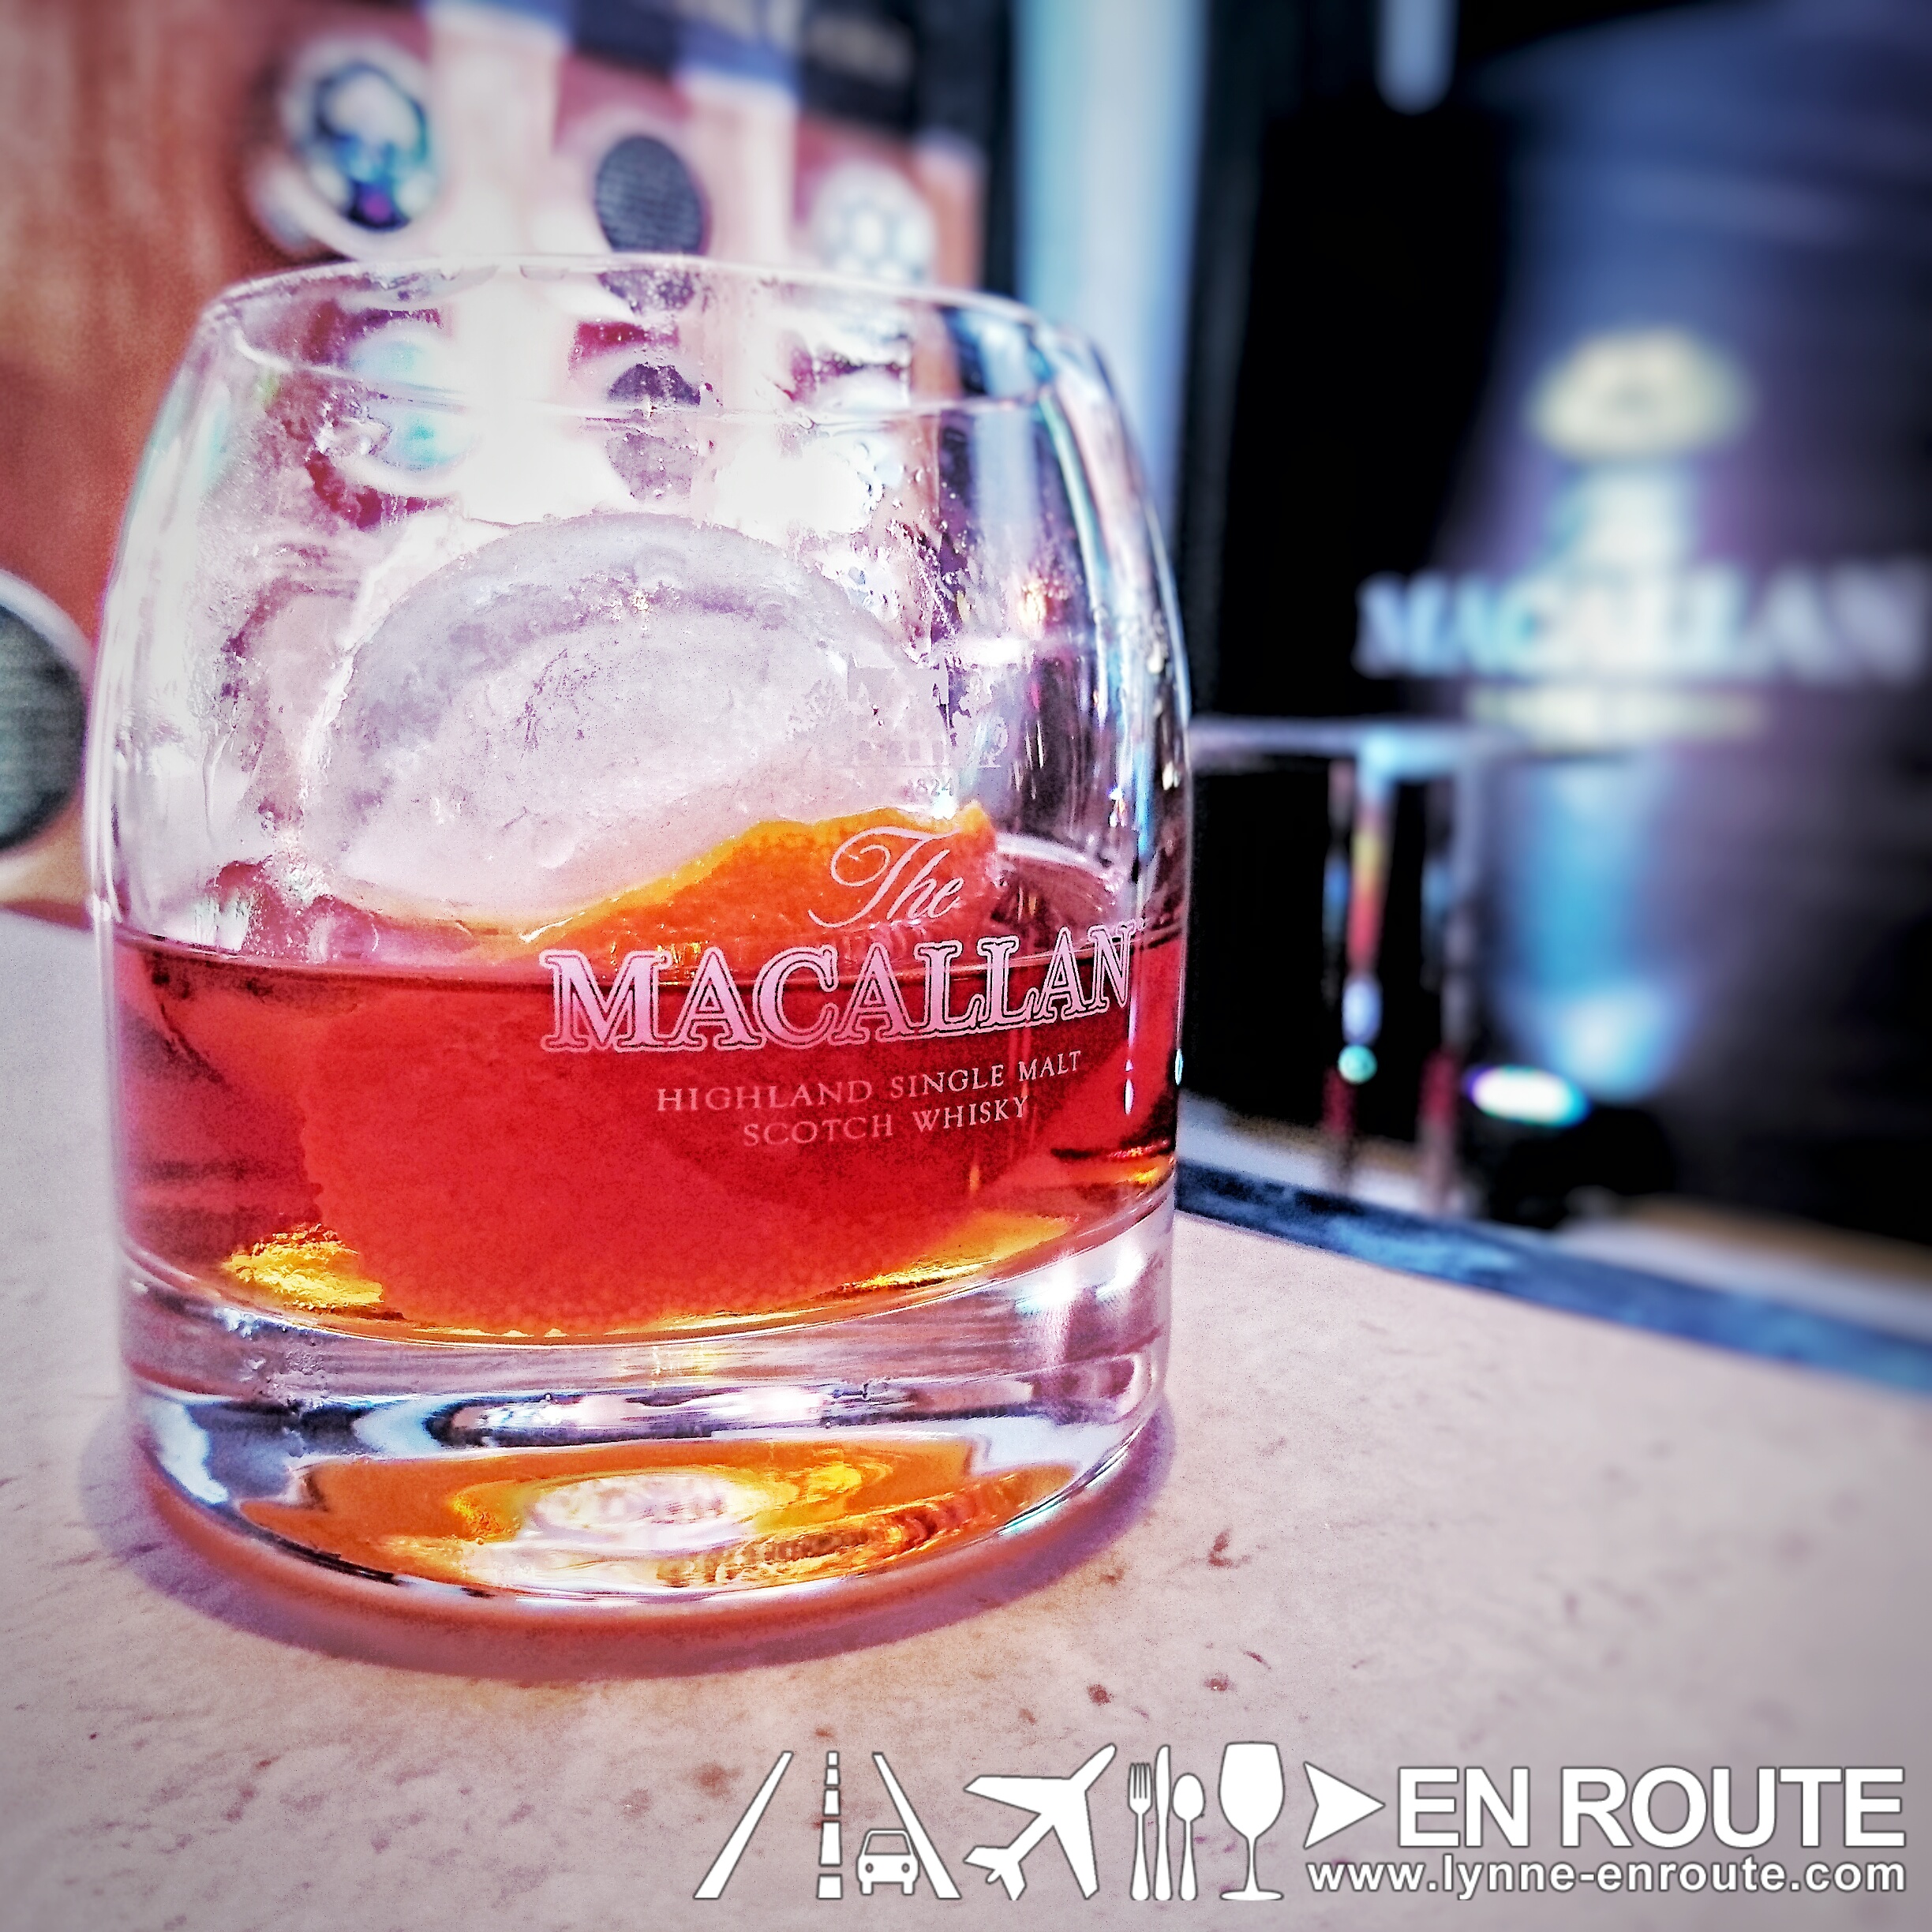 The Macallan Old Fashioned